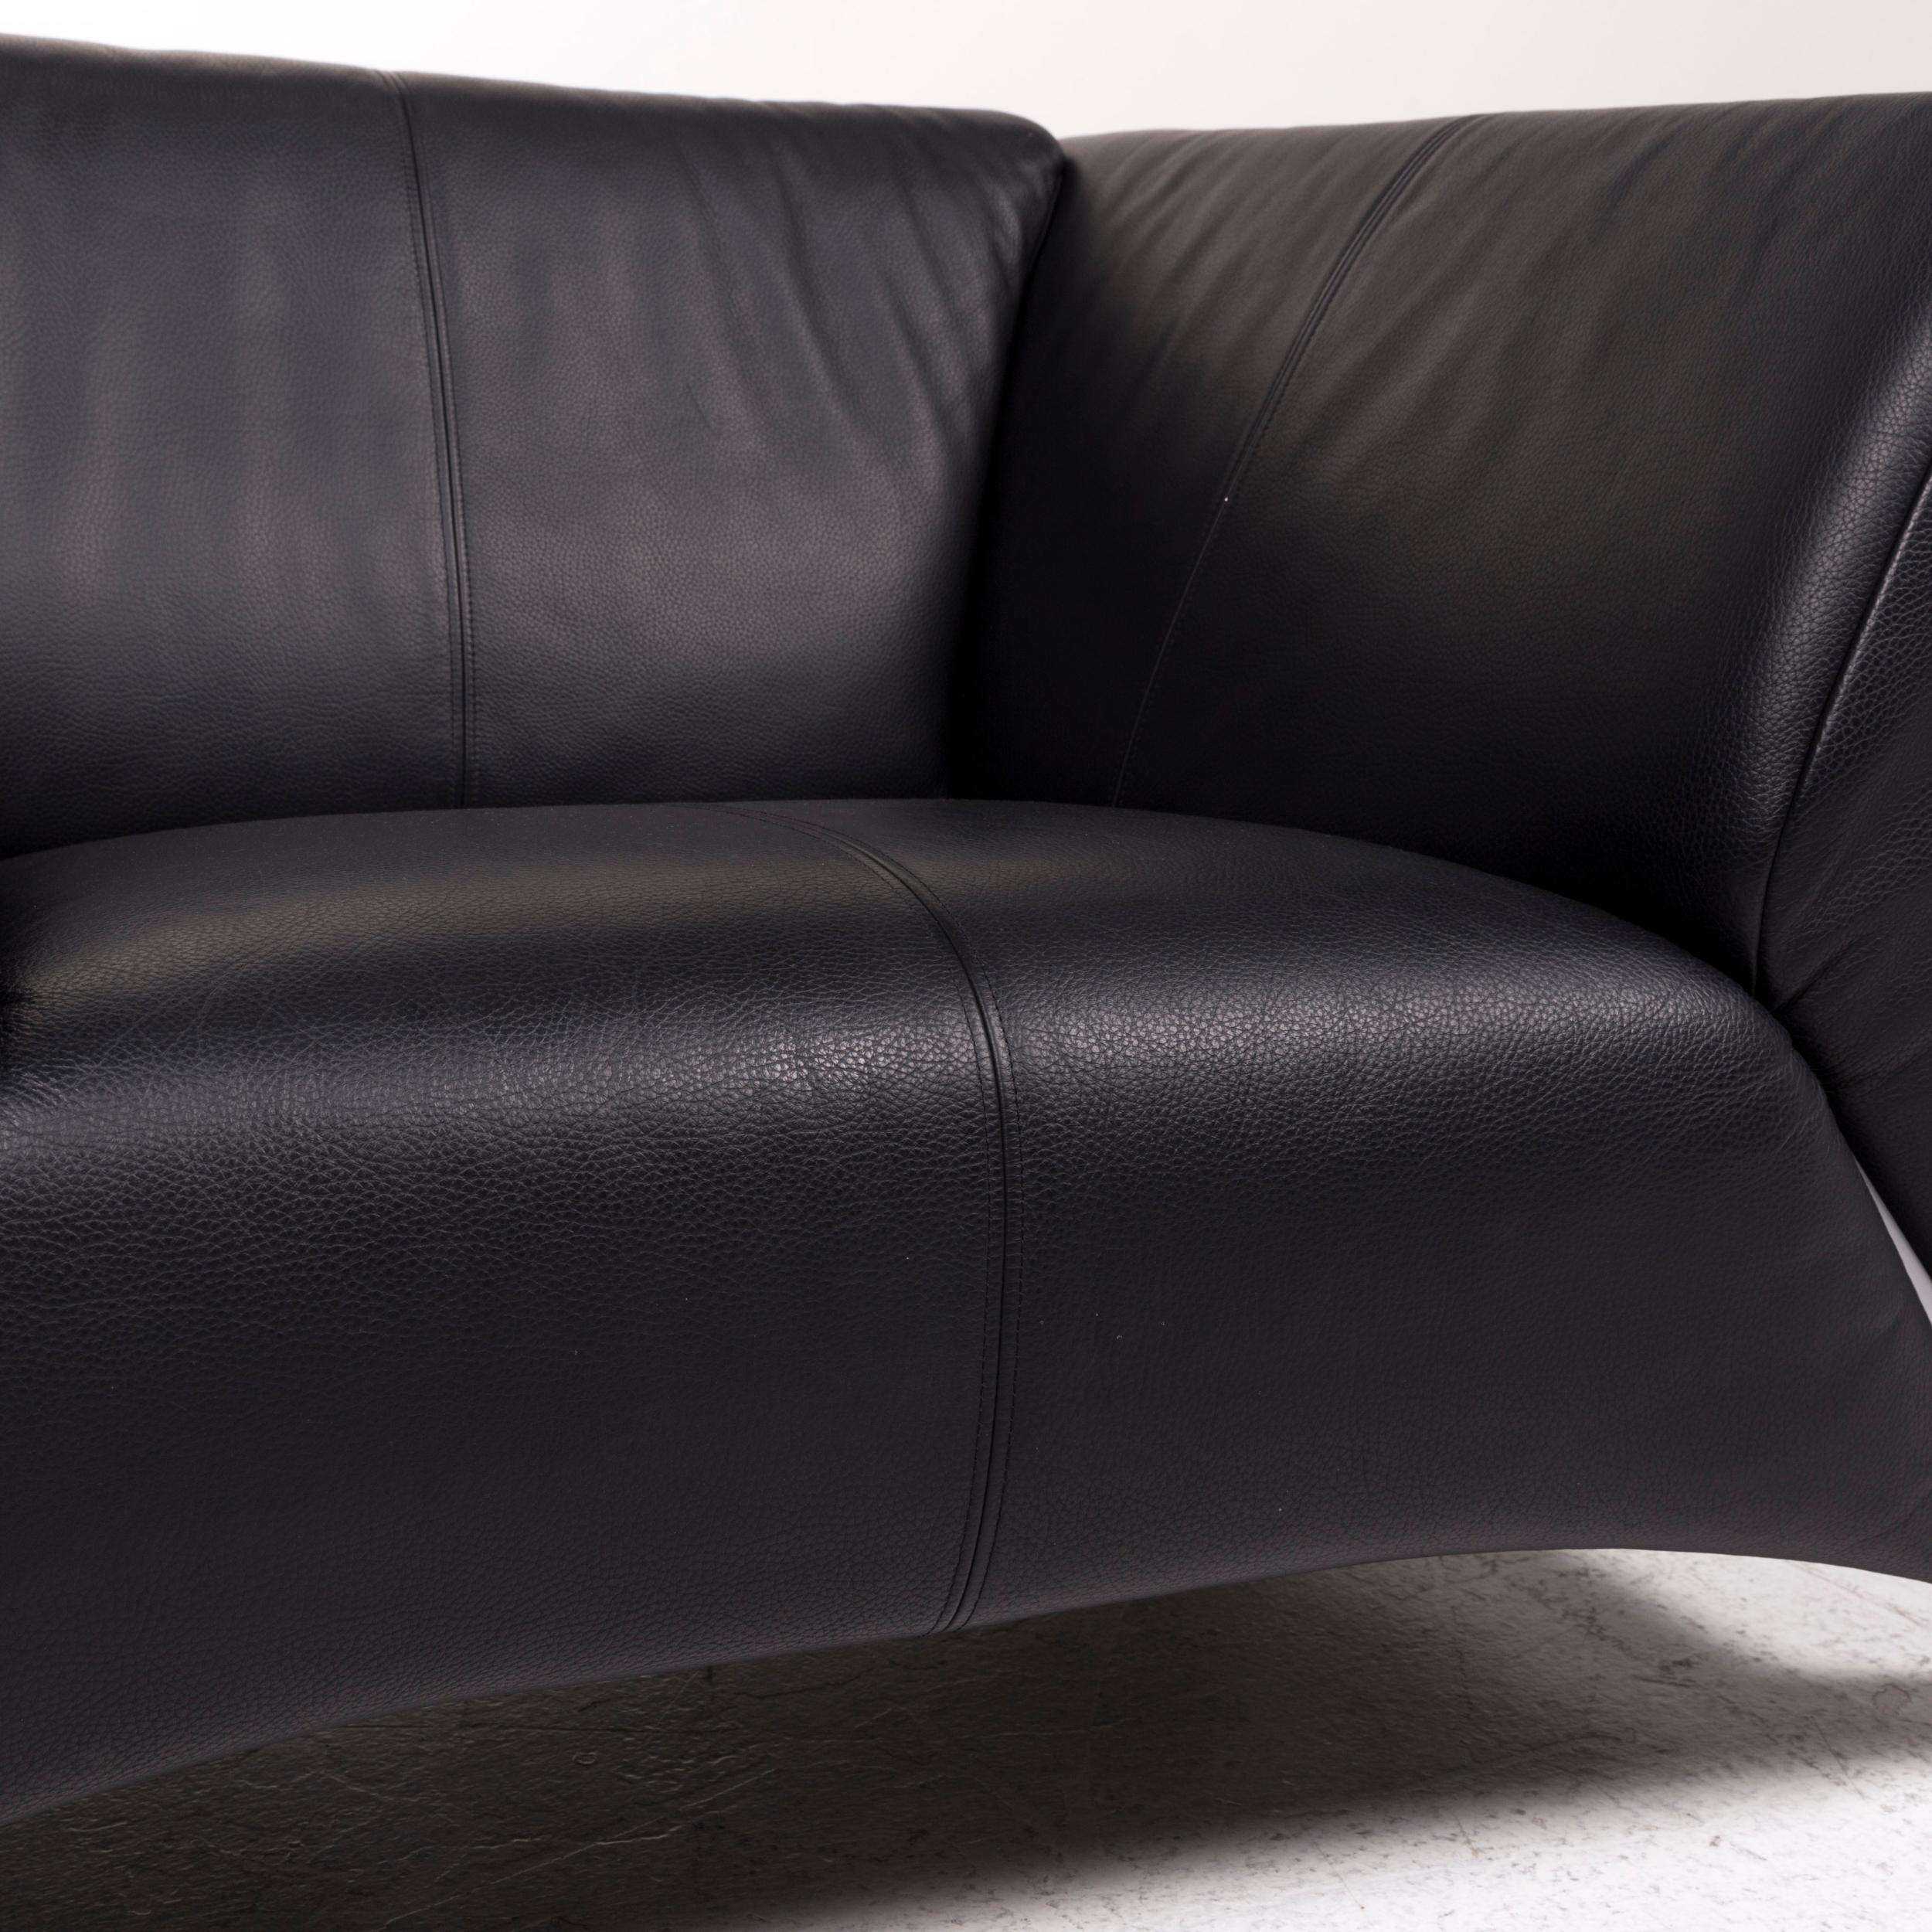 We bring to you a Rolf Benz 322 leather armchair black.


 Product measurements in centimeters:
 

Depth 97
Width 122
Height 71
Seat-height 39
Rest-height 69
Seat-depth 59
Seat-width 55
Back-height 35.
 